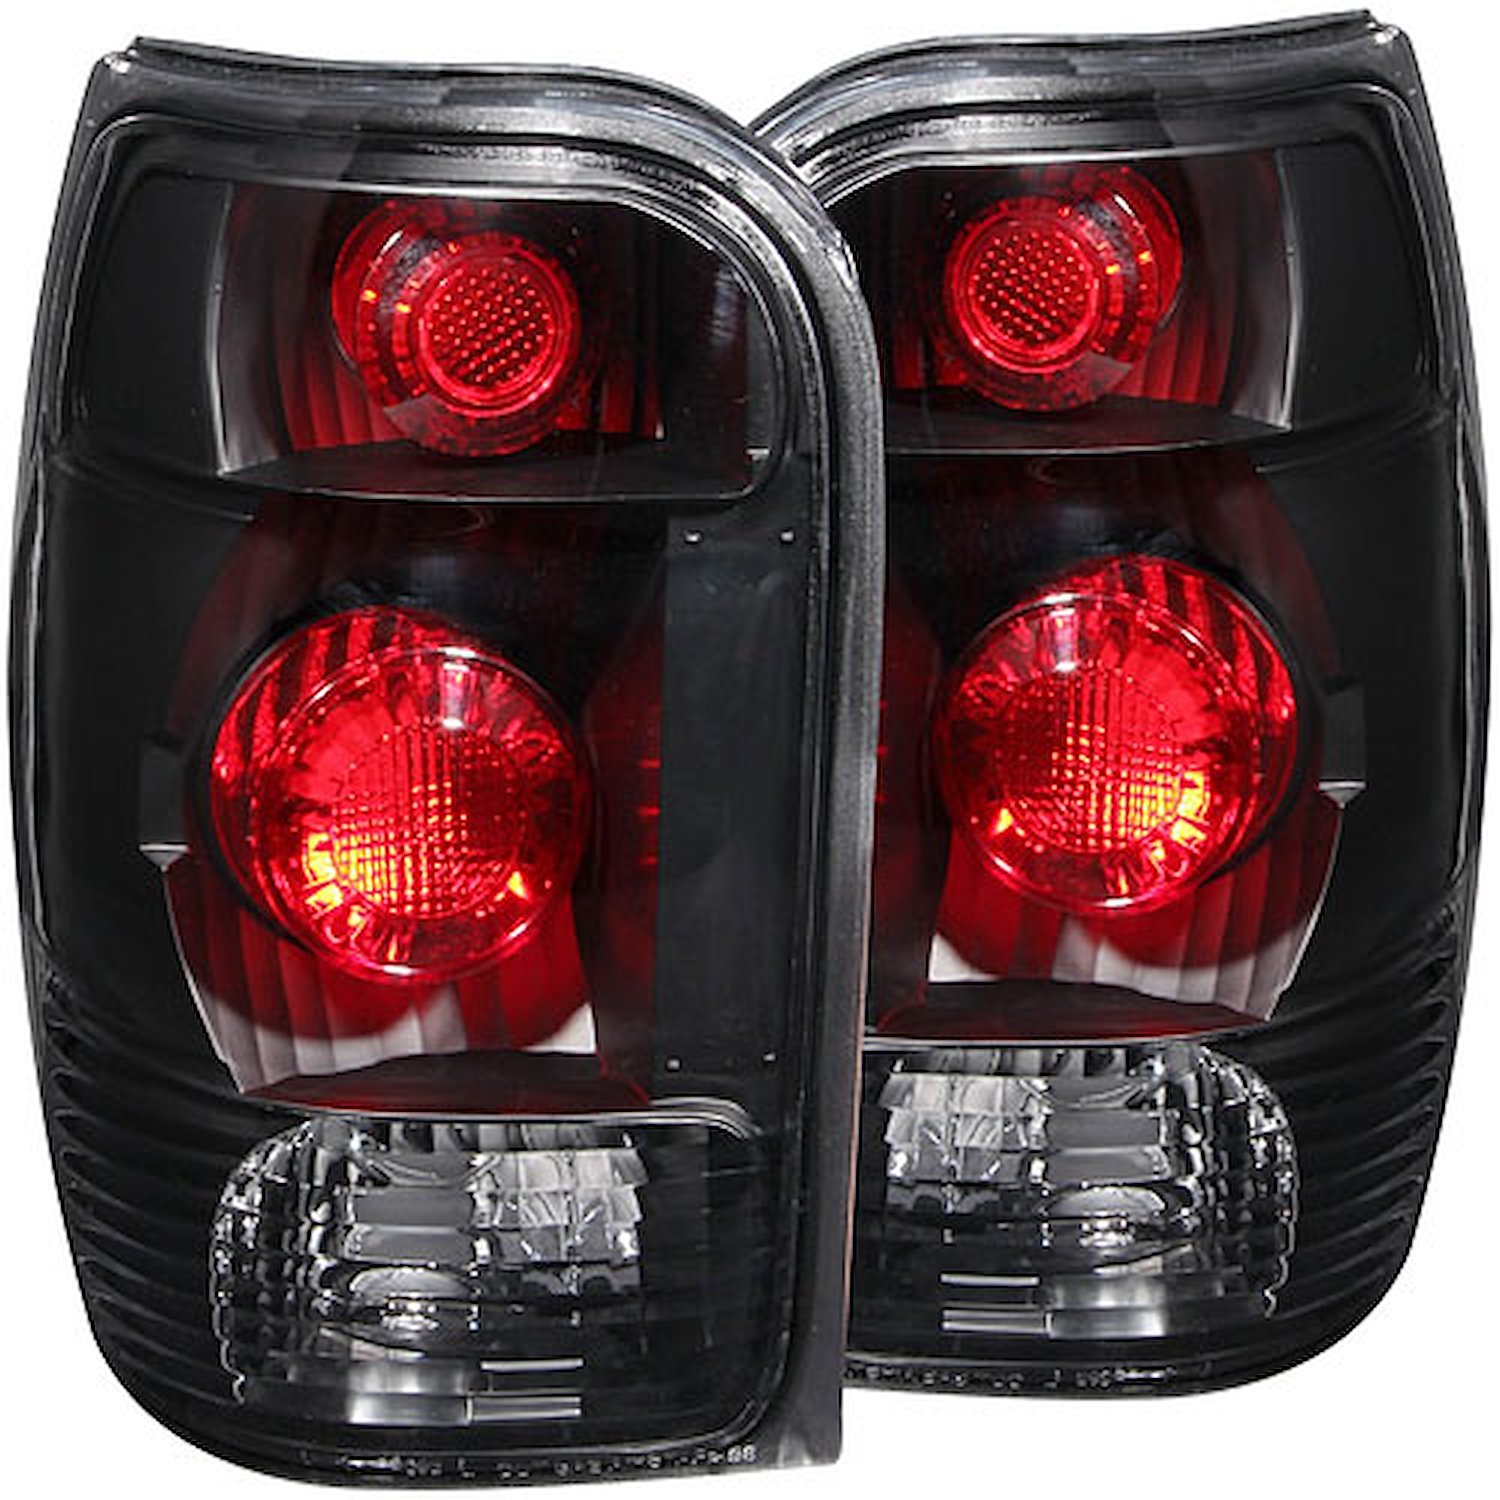 1998-2001 Ford Explorer Taillights